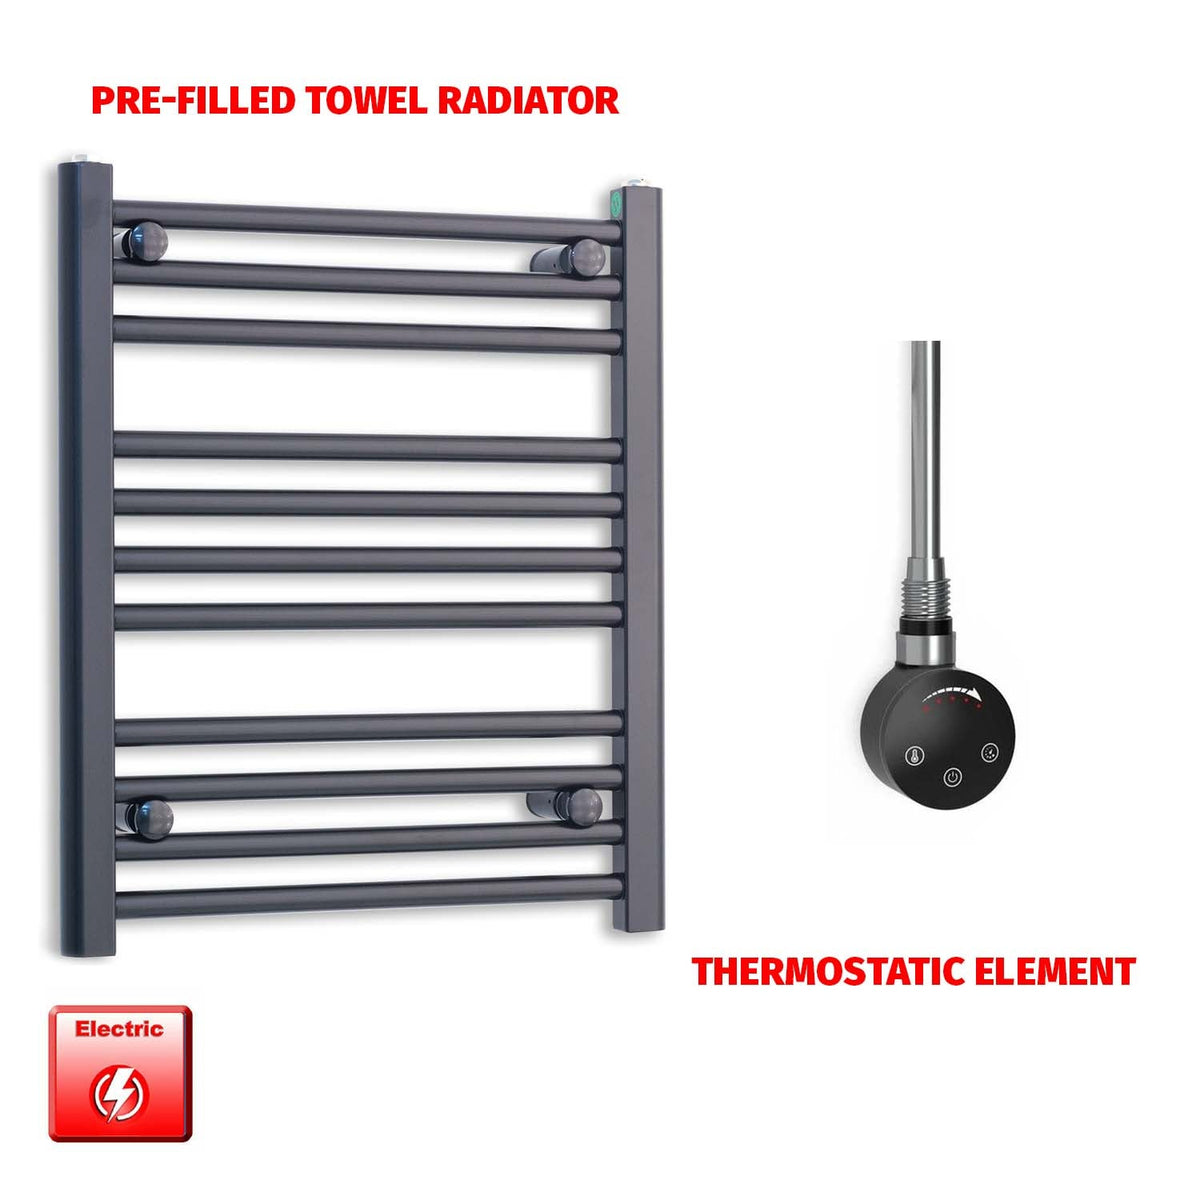 600 x 550mm Wide Flat Black Pre-Filled Electric Heated Towel Radiator HTR SMART Thermostatic No Timer